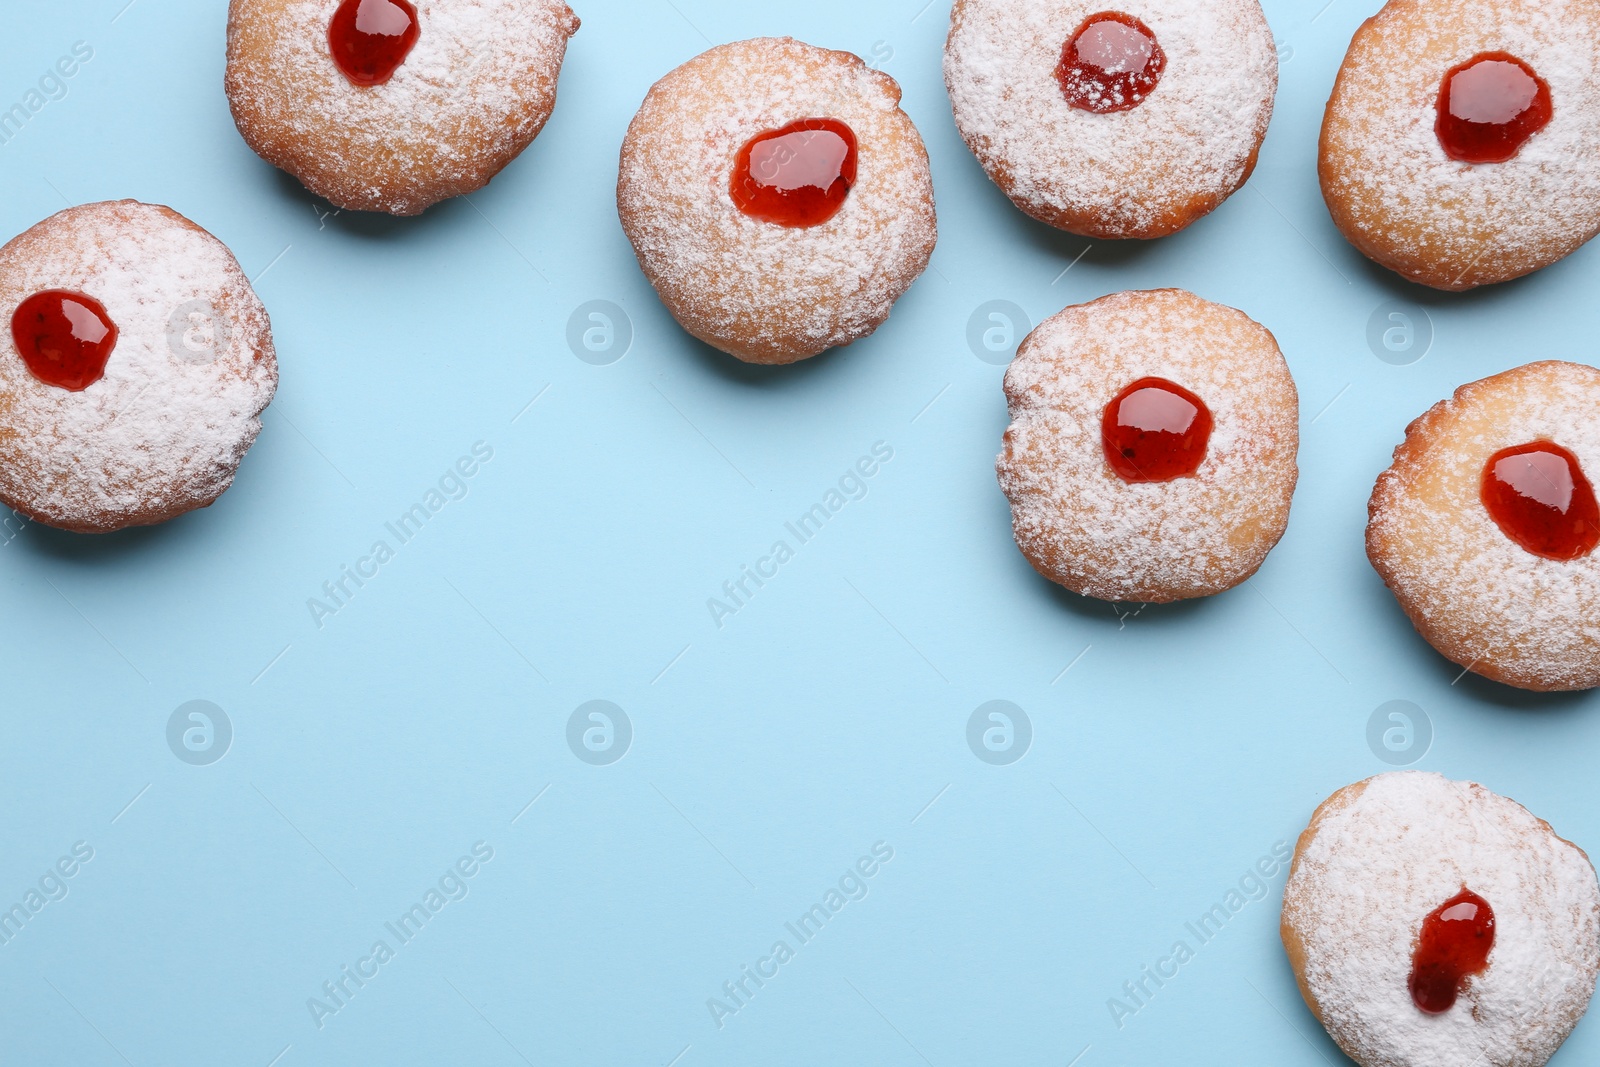 Photo of Hanukkah donuts with jelly and powdered sugar on light blue background, flat lay. Space for text